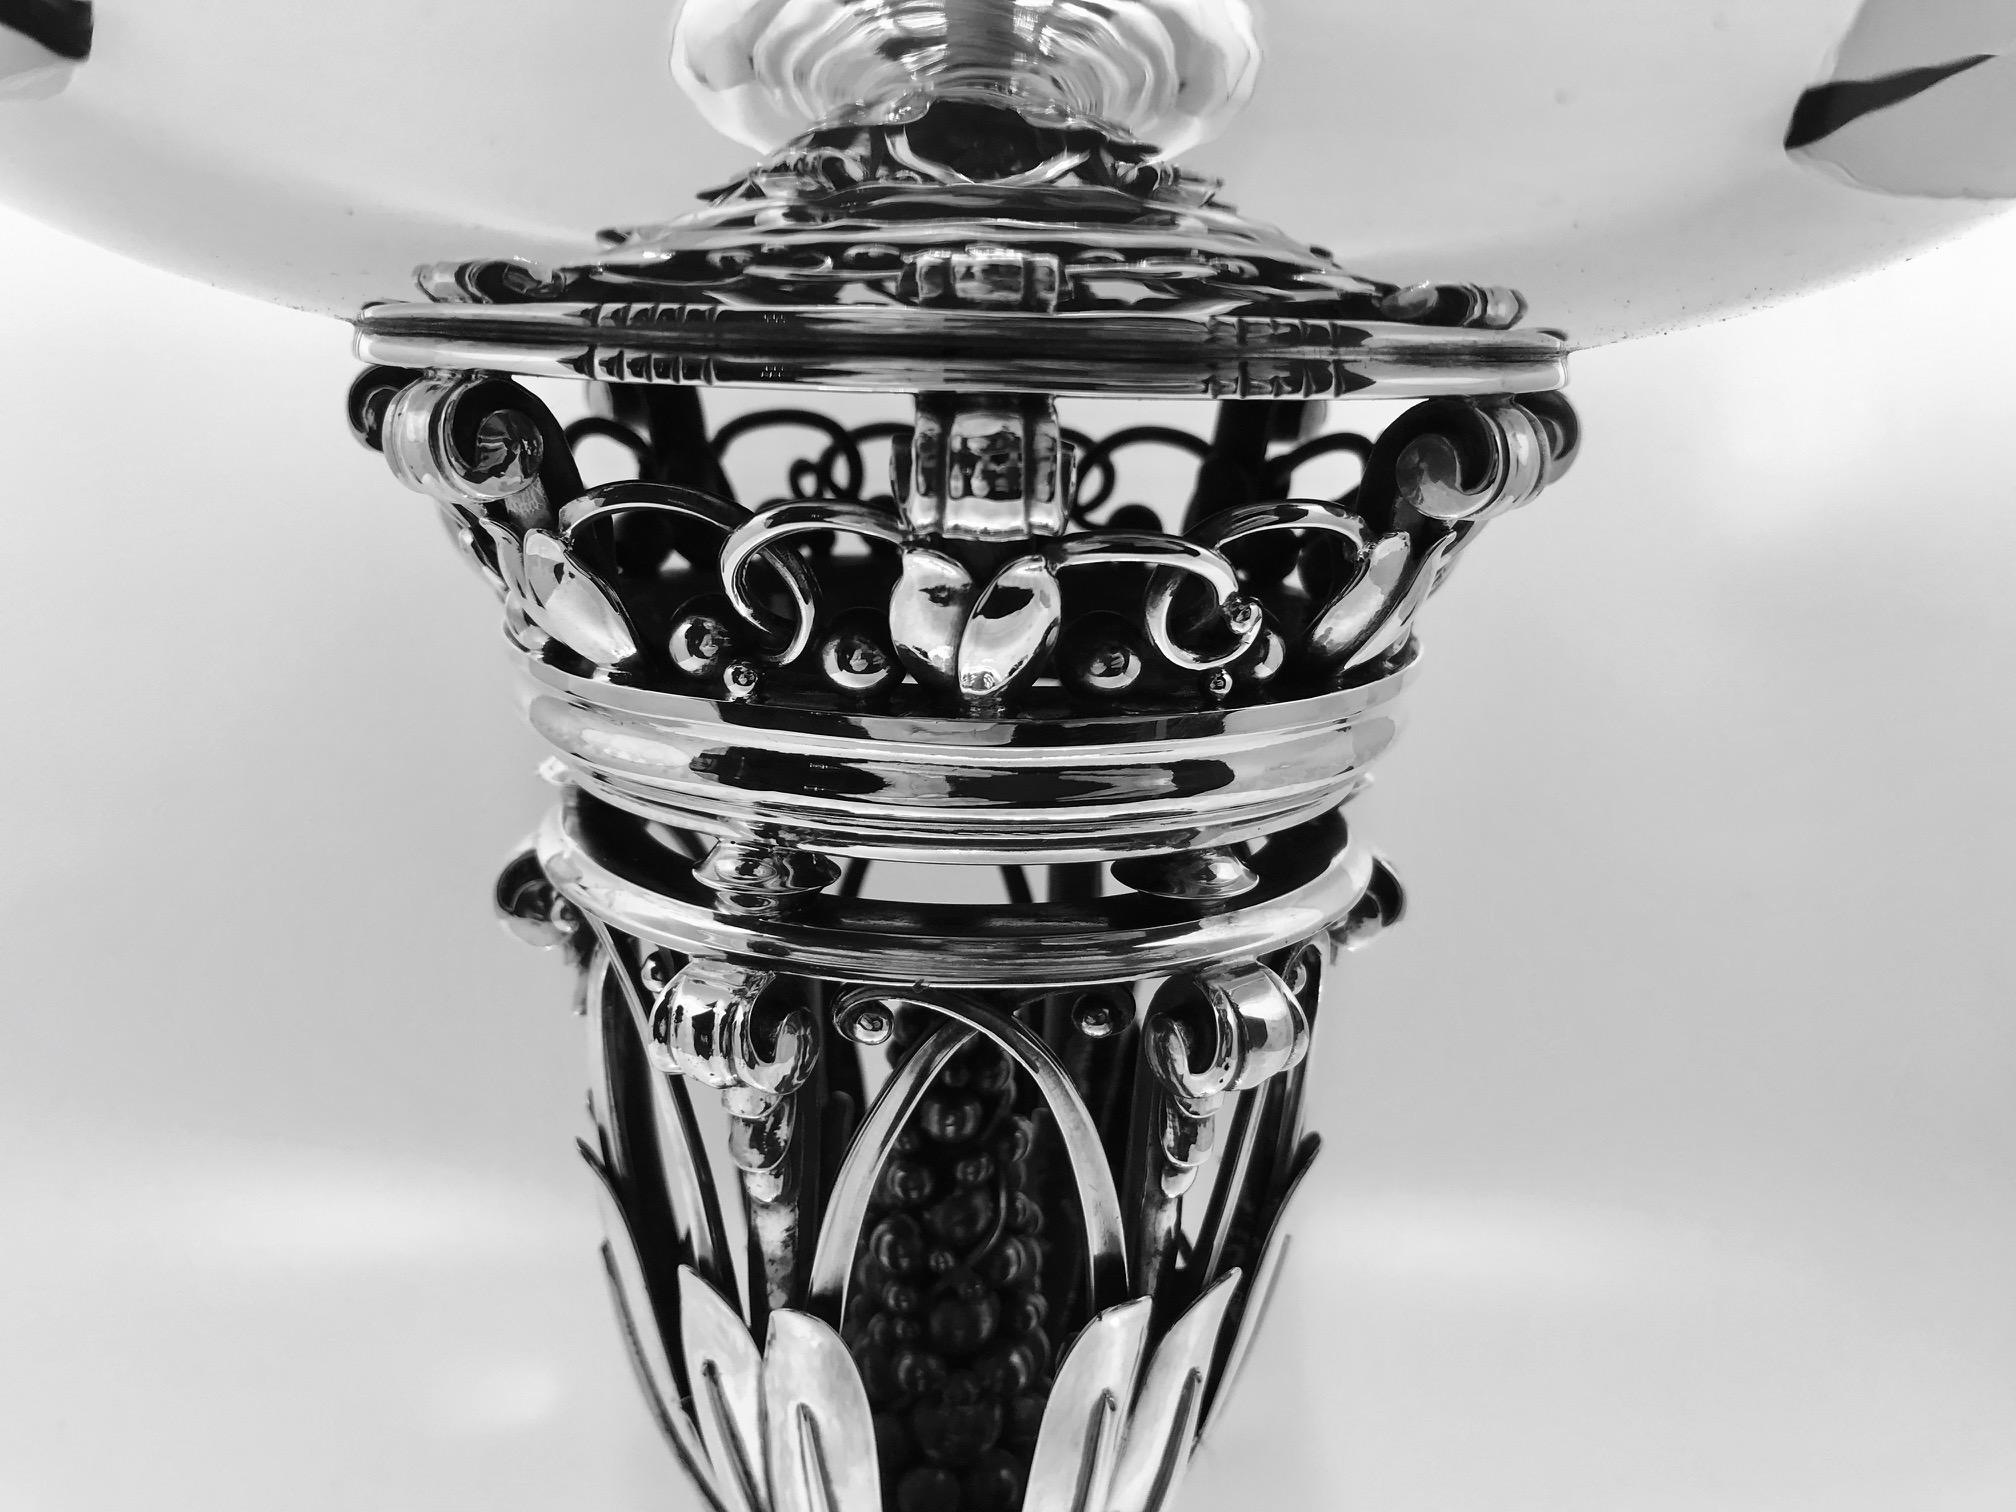 This is an impressive sterling silver Georg Jensen Centerpiece bowl, design #250B by Johan Rohde from 1917.

Measures an impressive 13